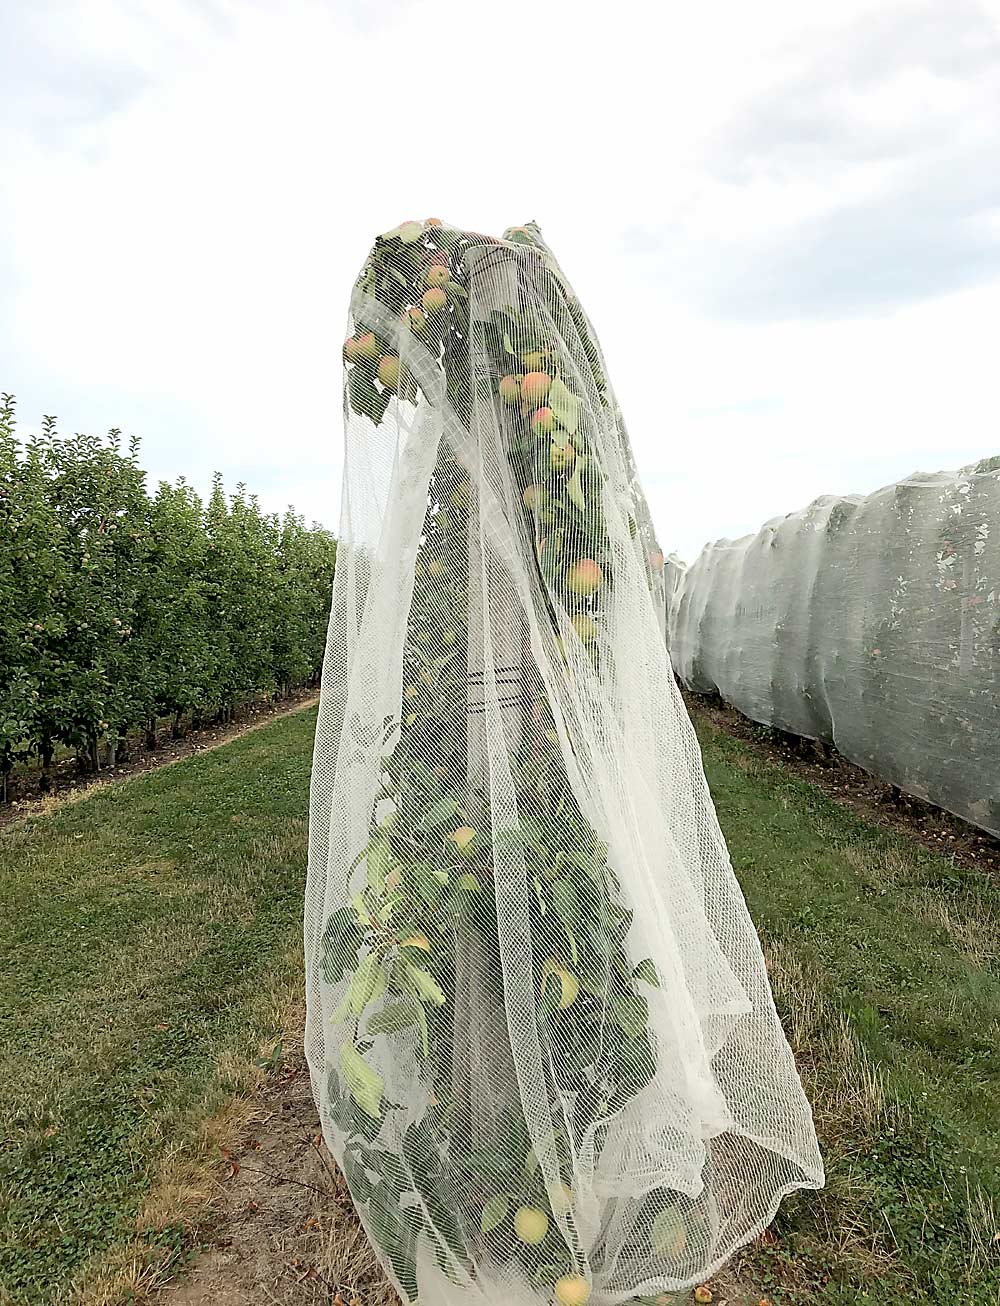 Even if it doesn’t hail, growers say drape netting pays for itself in bird control alone. (Courtesy Paul Wafler)